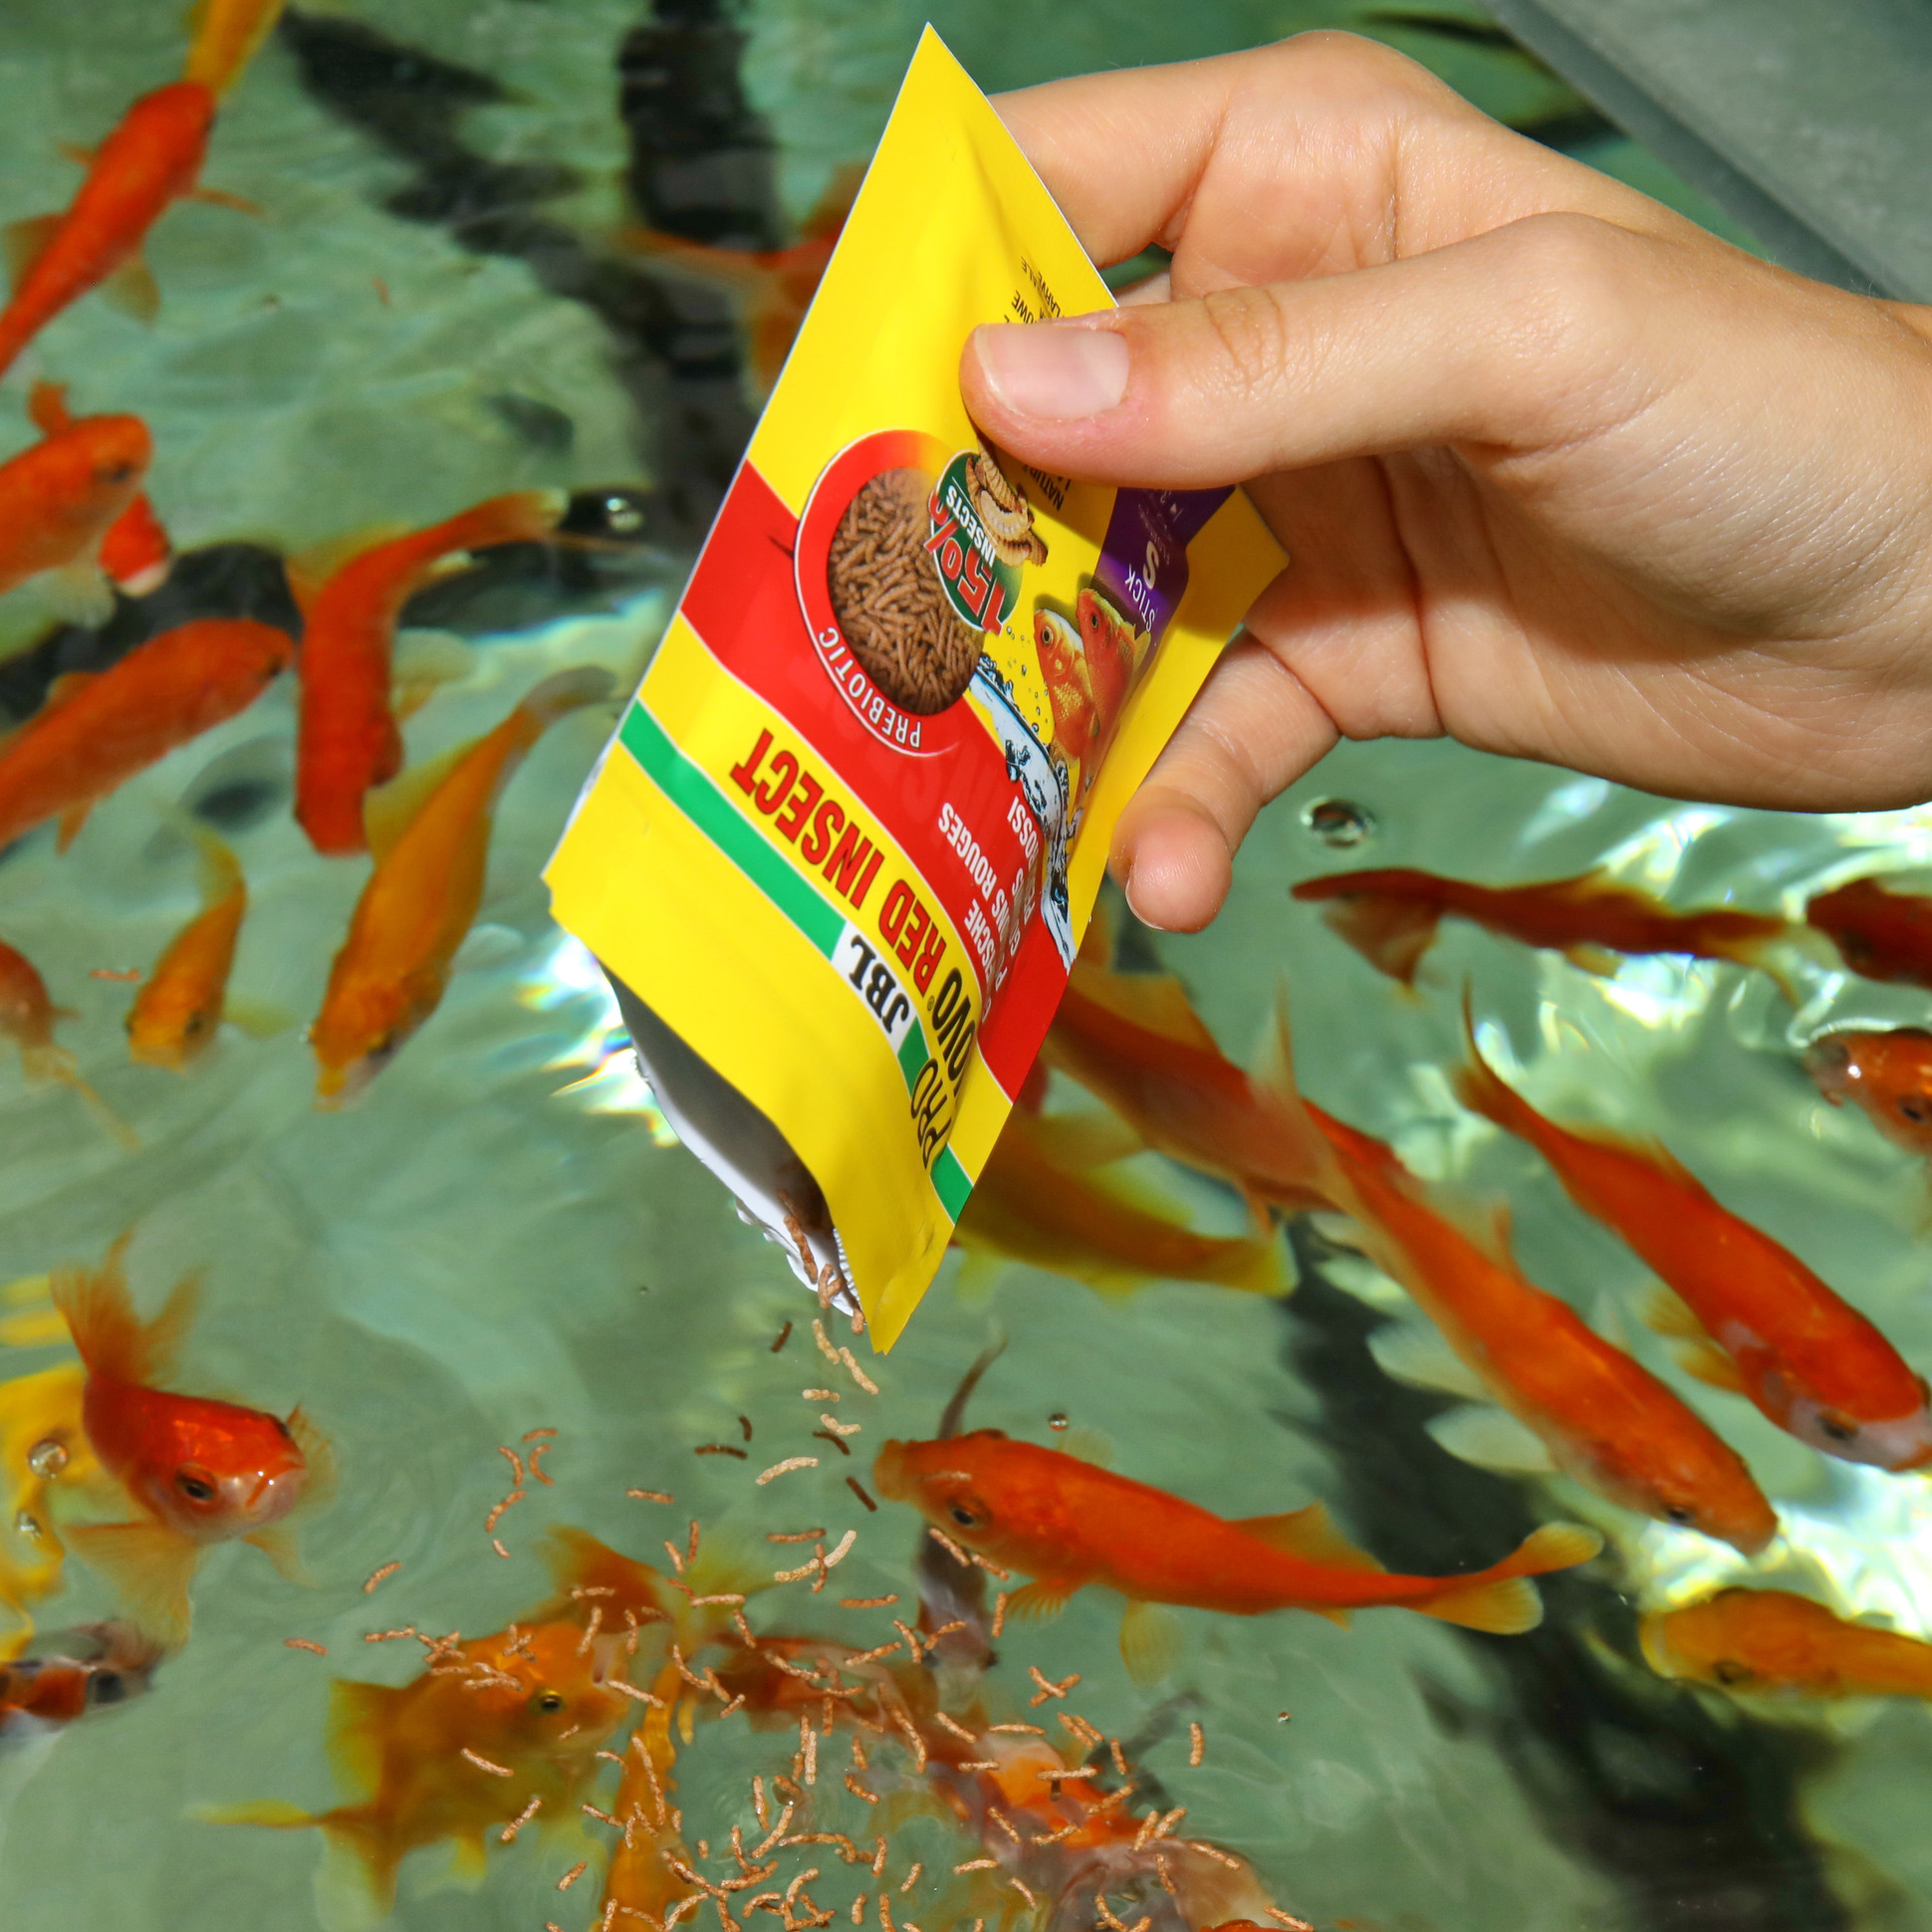 JBL Pronovo Red Insect Stick S Alimento para goldfish con insectos